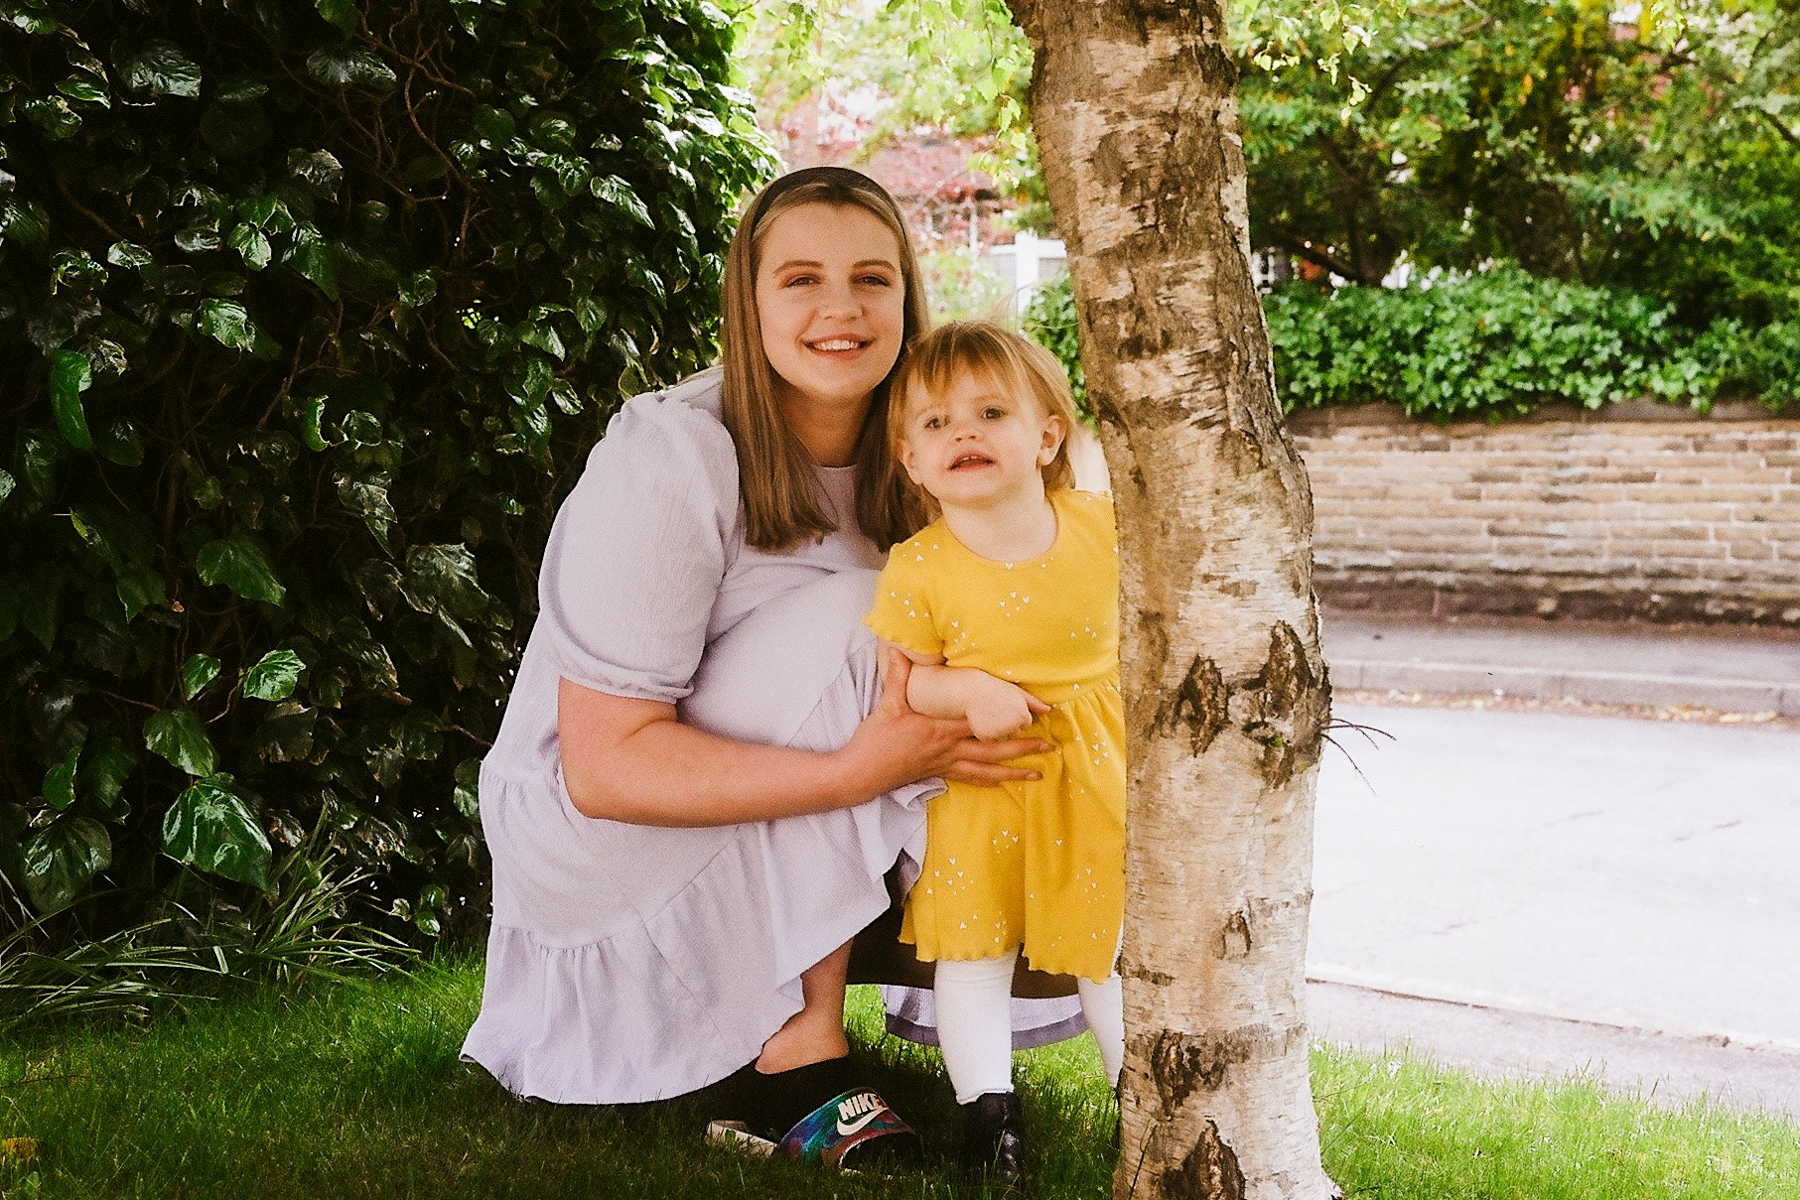 A photo of mum Megan smiling, crouched down by a tree with her daughter who is also looking into the camera; Megan is wearing a lilac dress and her daughter is wearing a yellow dress